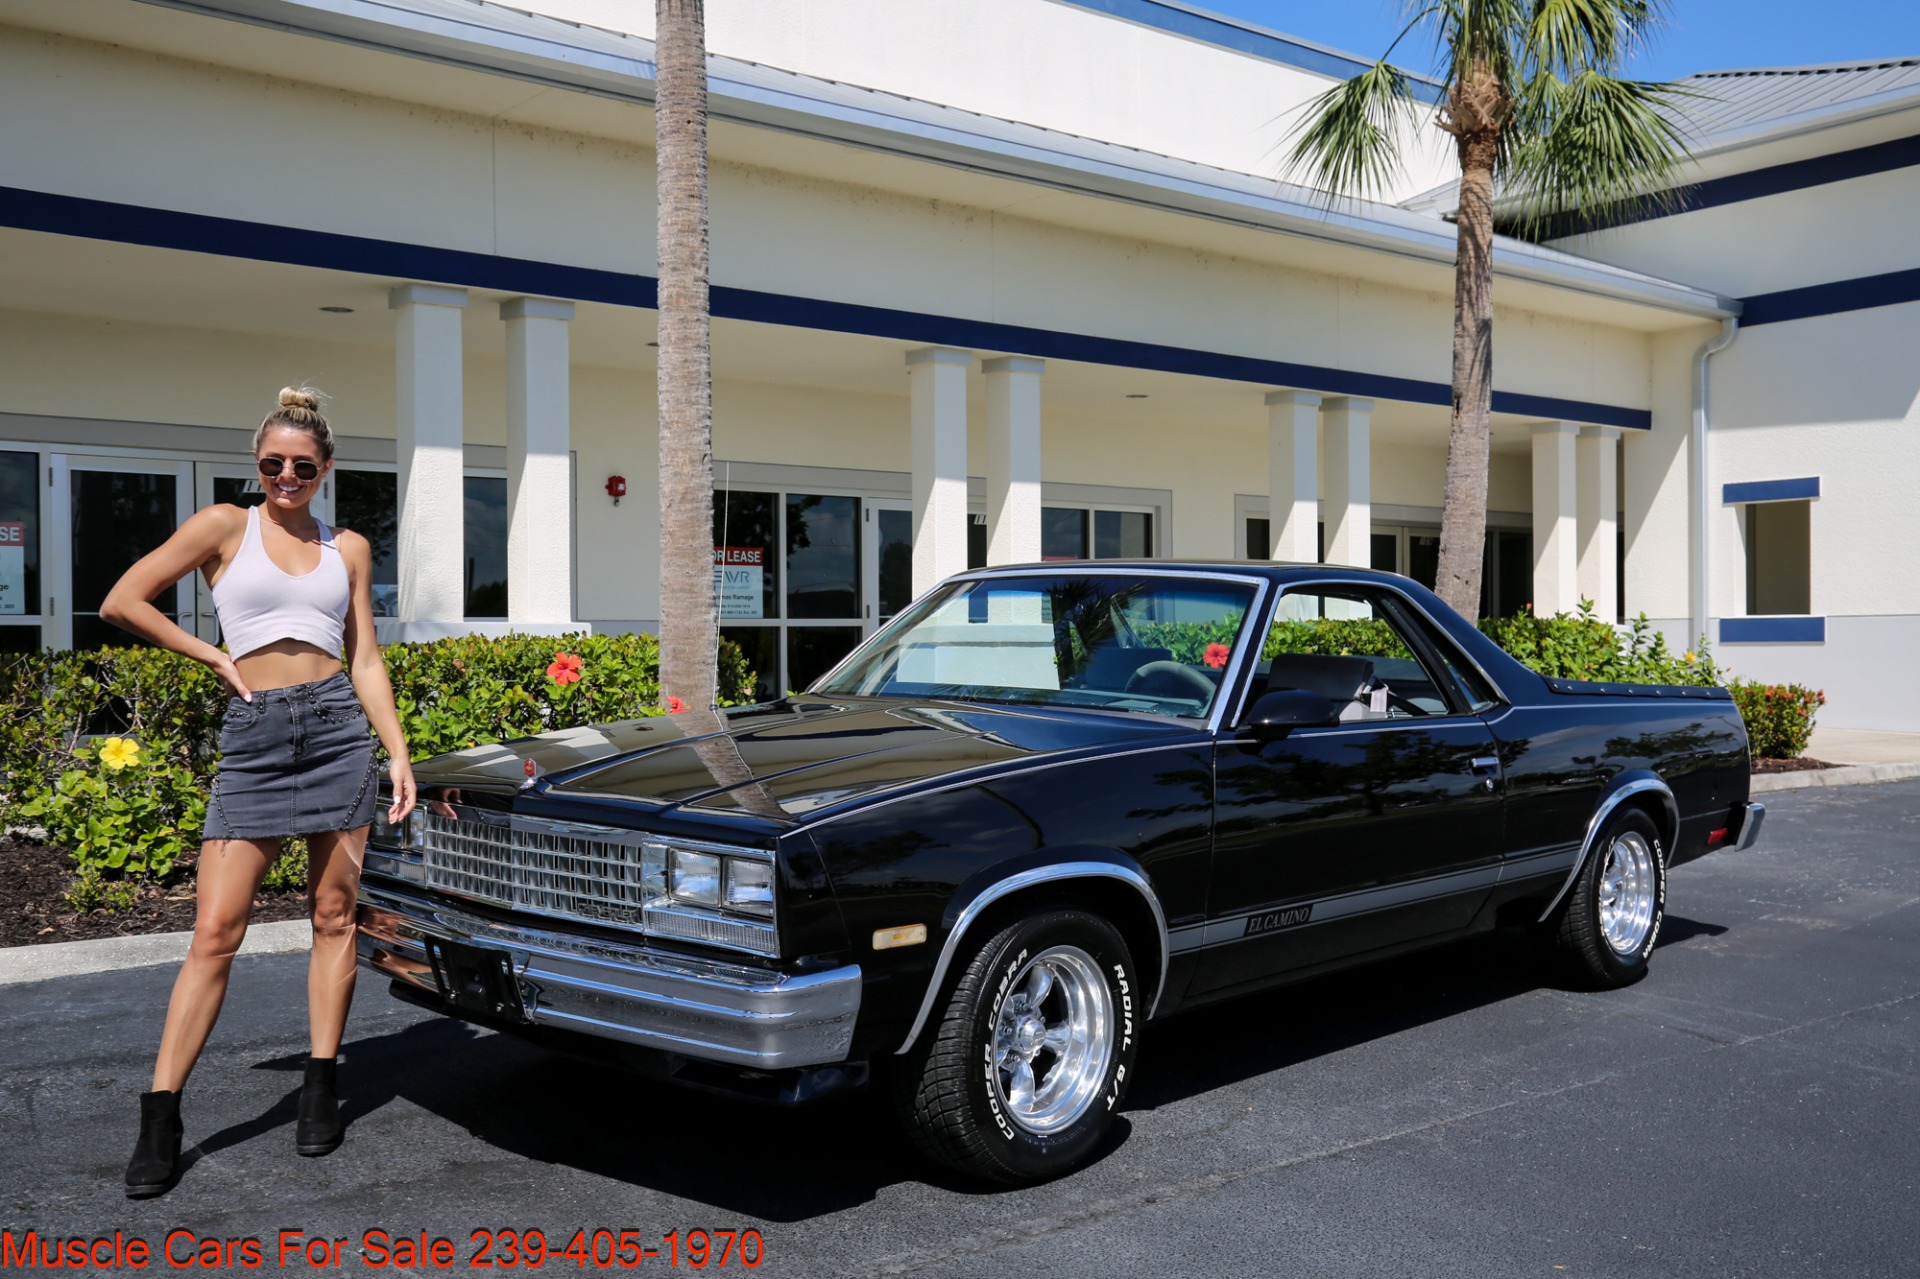 Used 1986 Chevrolet El Camino V8 Auto for sale $18,500 at Muscle Cars for Sale Inc. in Fort Myers FL 33912 1